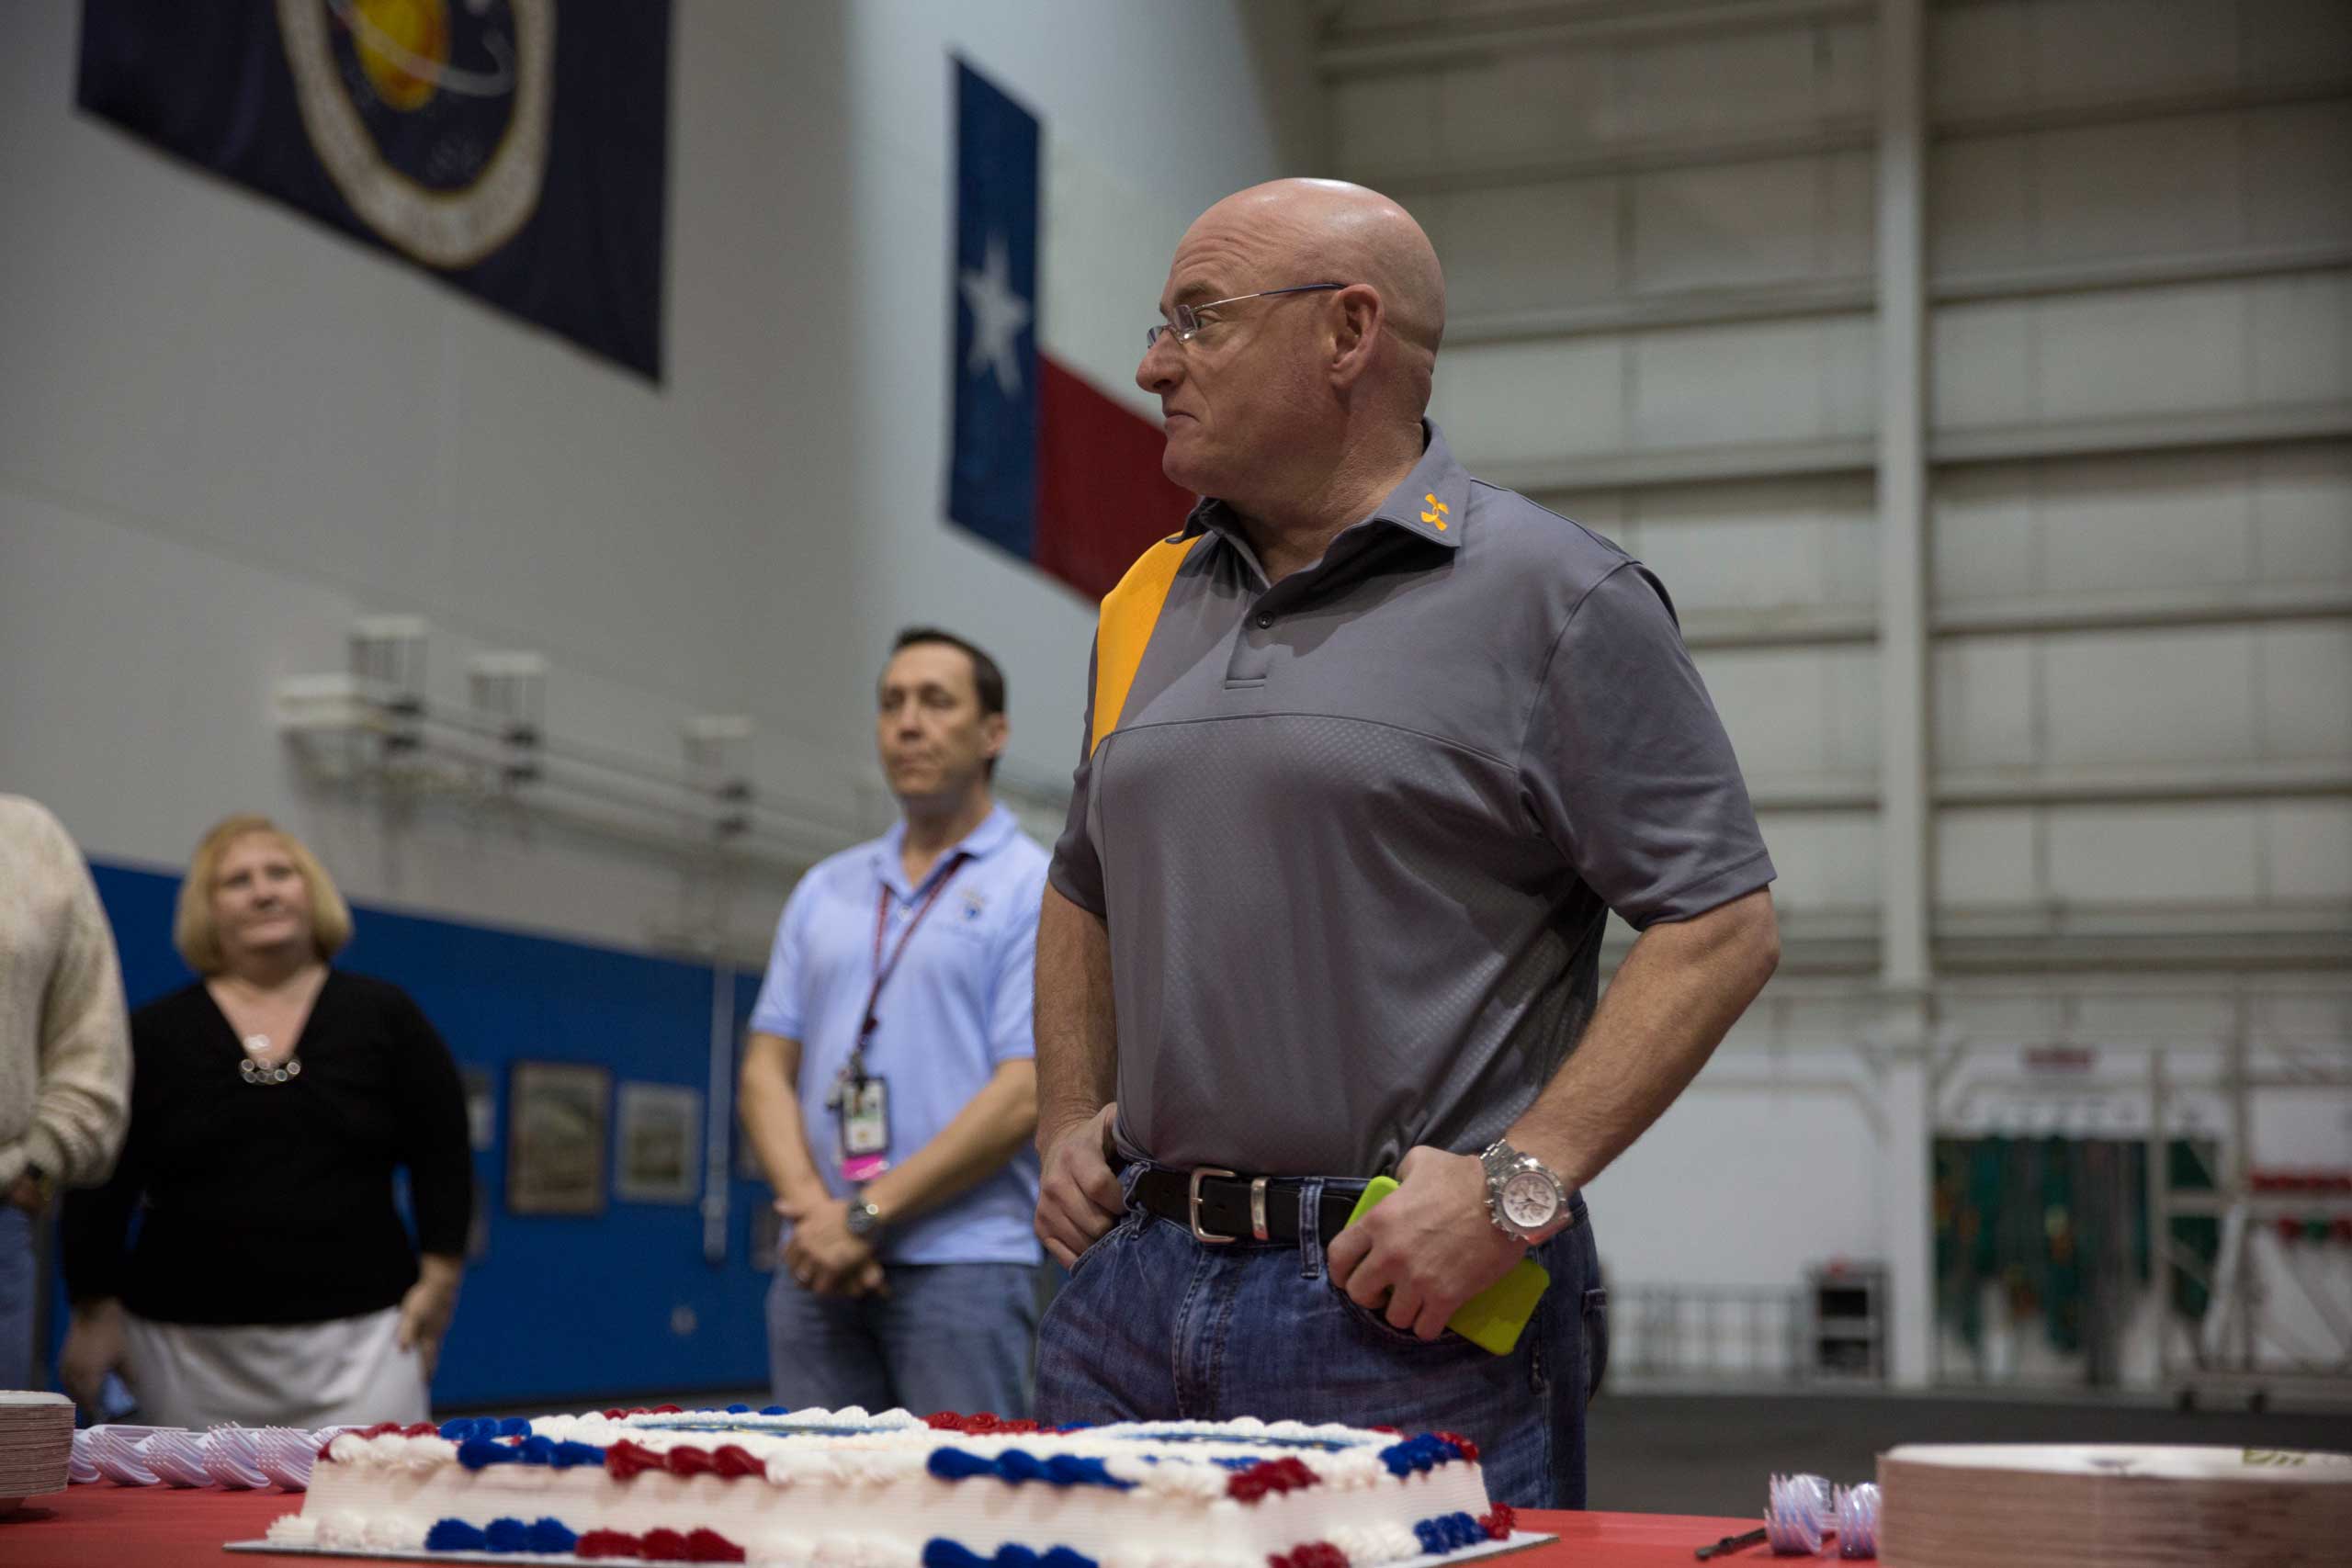 Following the successful completion of his final training in the pool, the staff at the Neutral Buoyancy Lab in Houston presented Scott with a cake wishing him well on the mission. (Marco Grob for TIME)